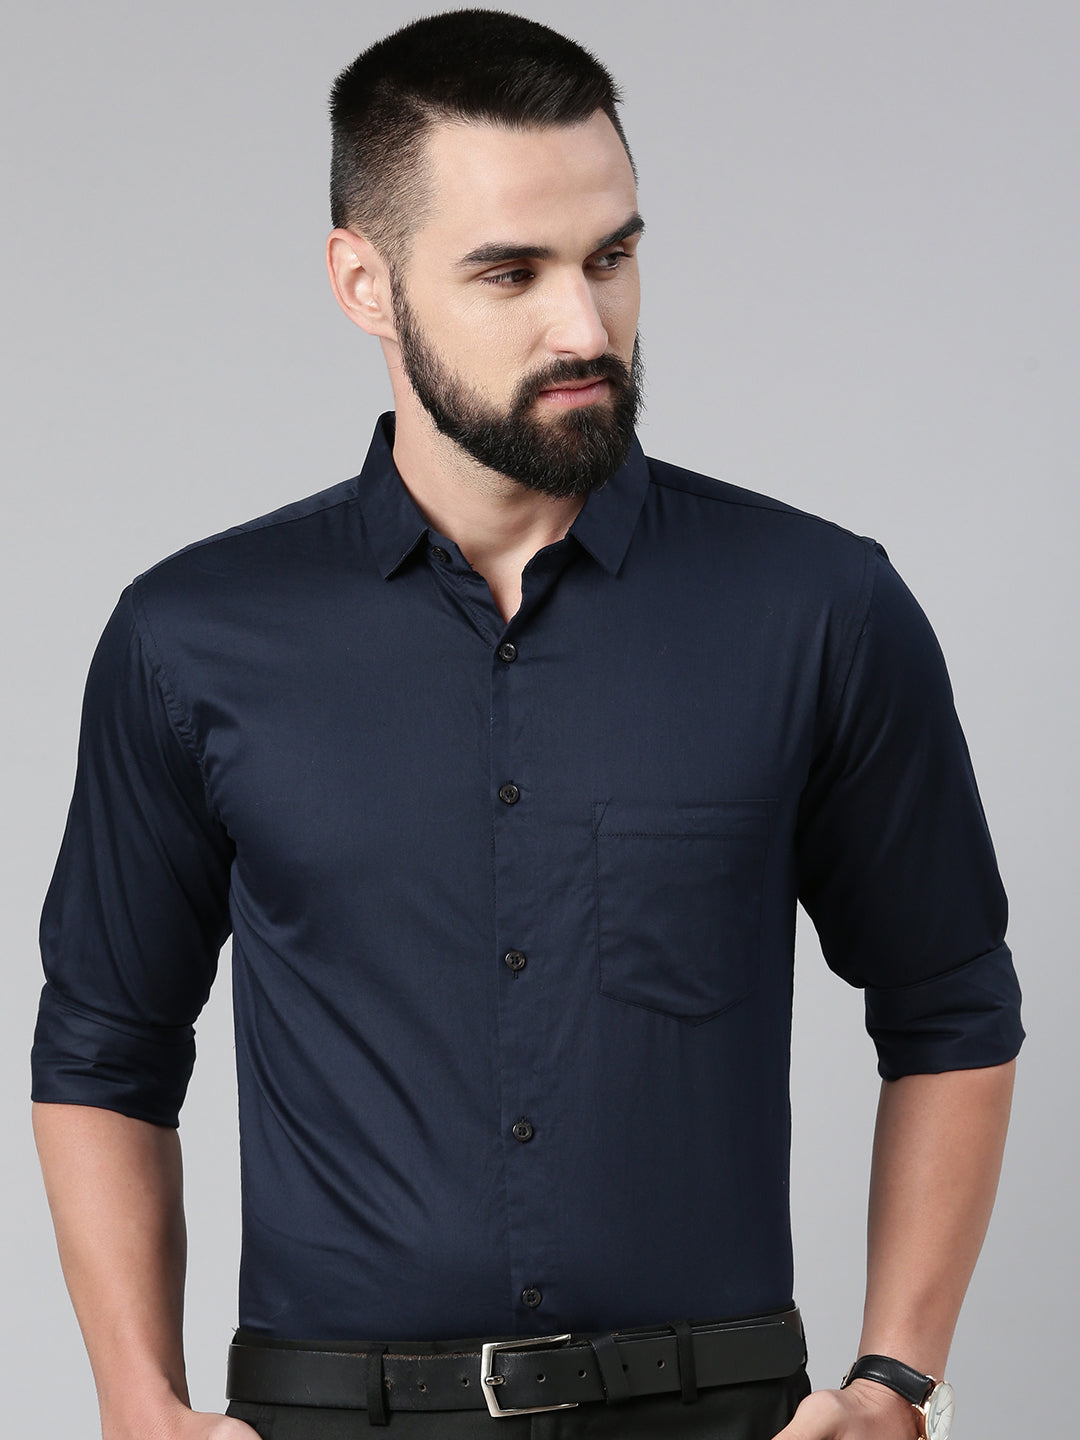 Paramount Pure Cotton Solid Shirt - Navy Blue